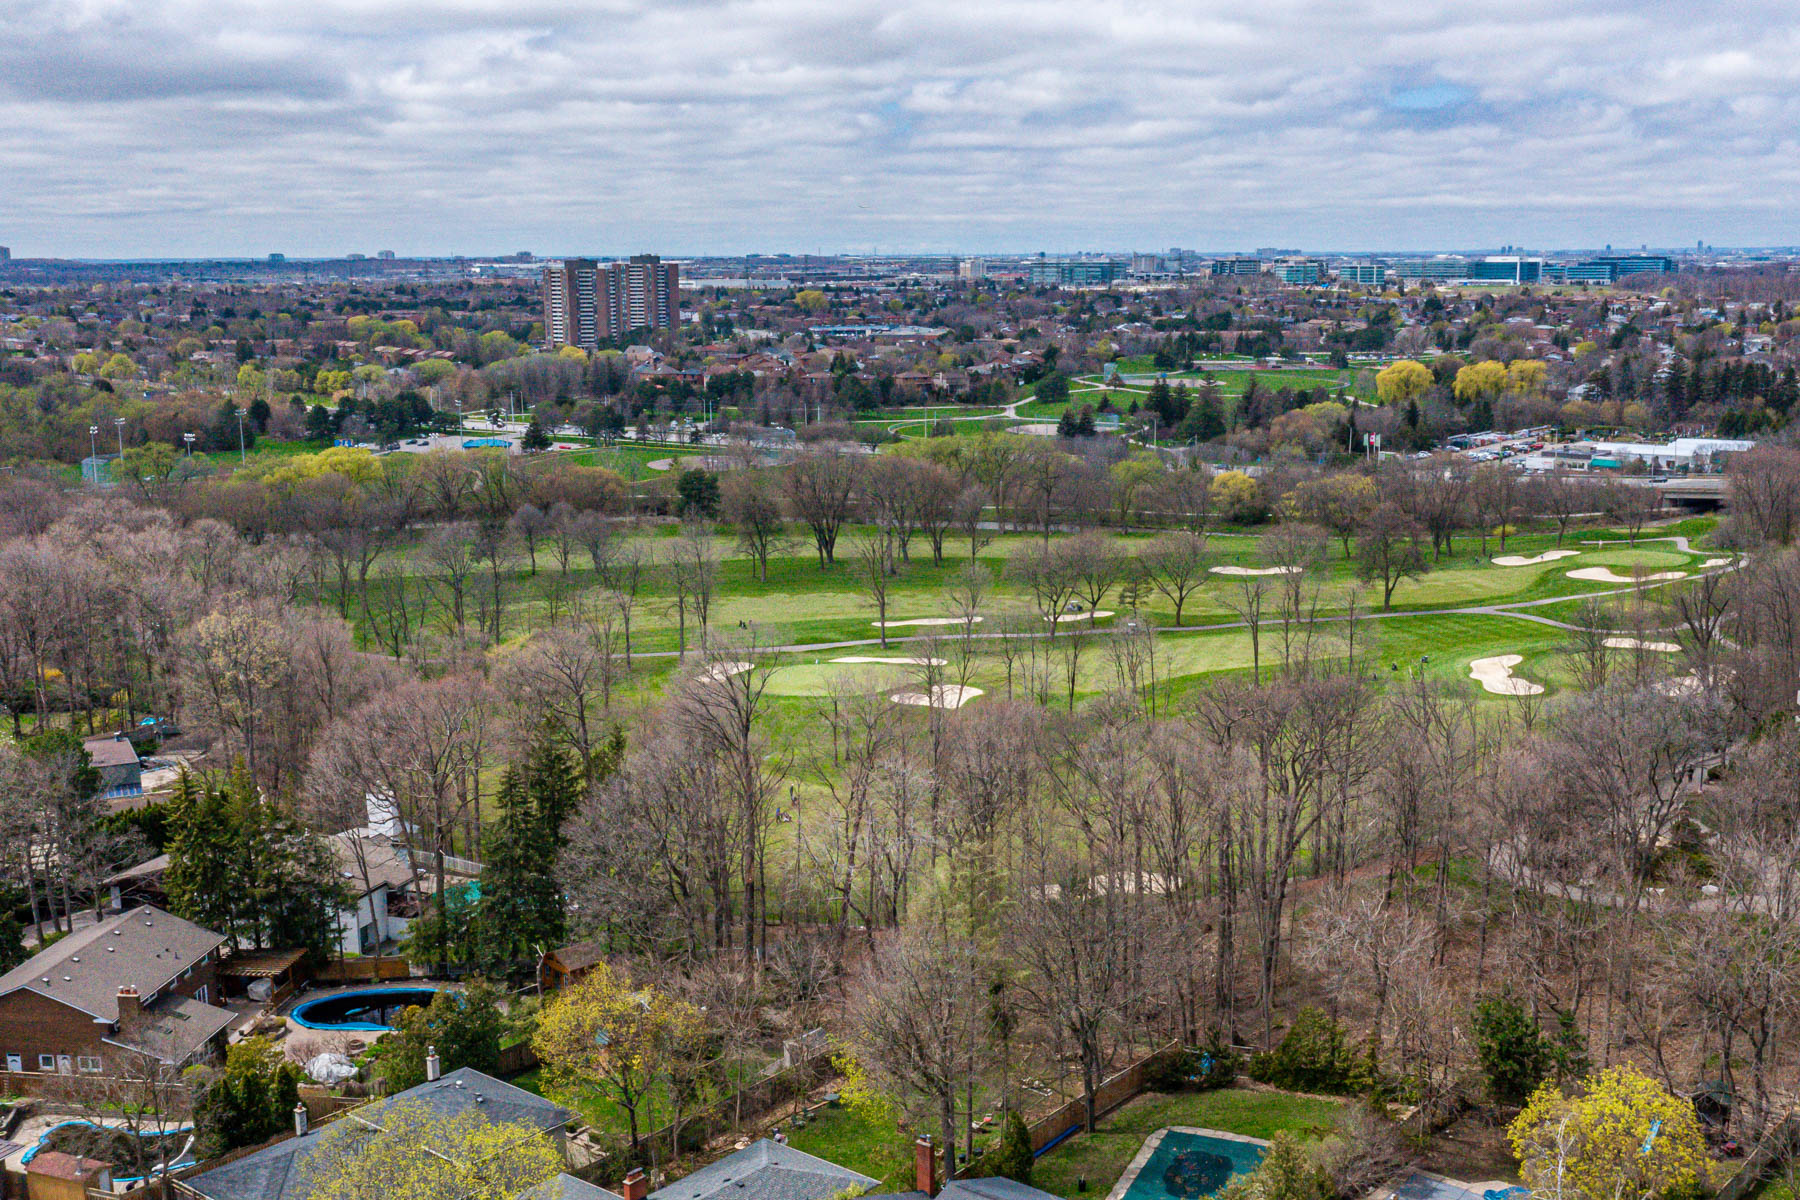 Aerial shot of Markland Wood Golf Course showing trees, fairway, houses and buildings.